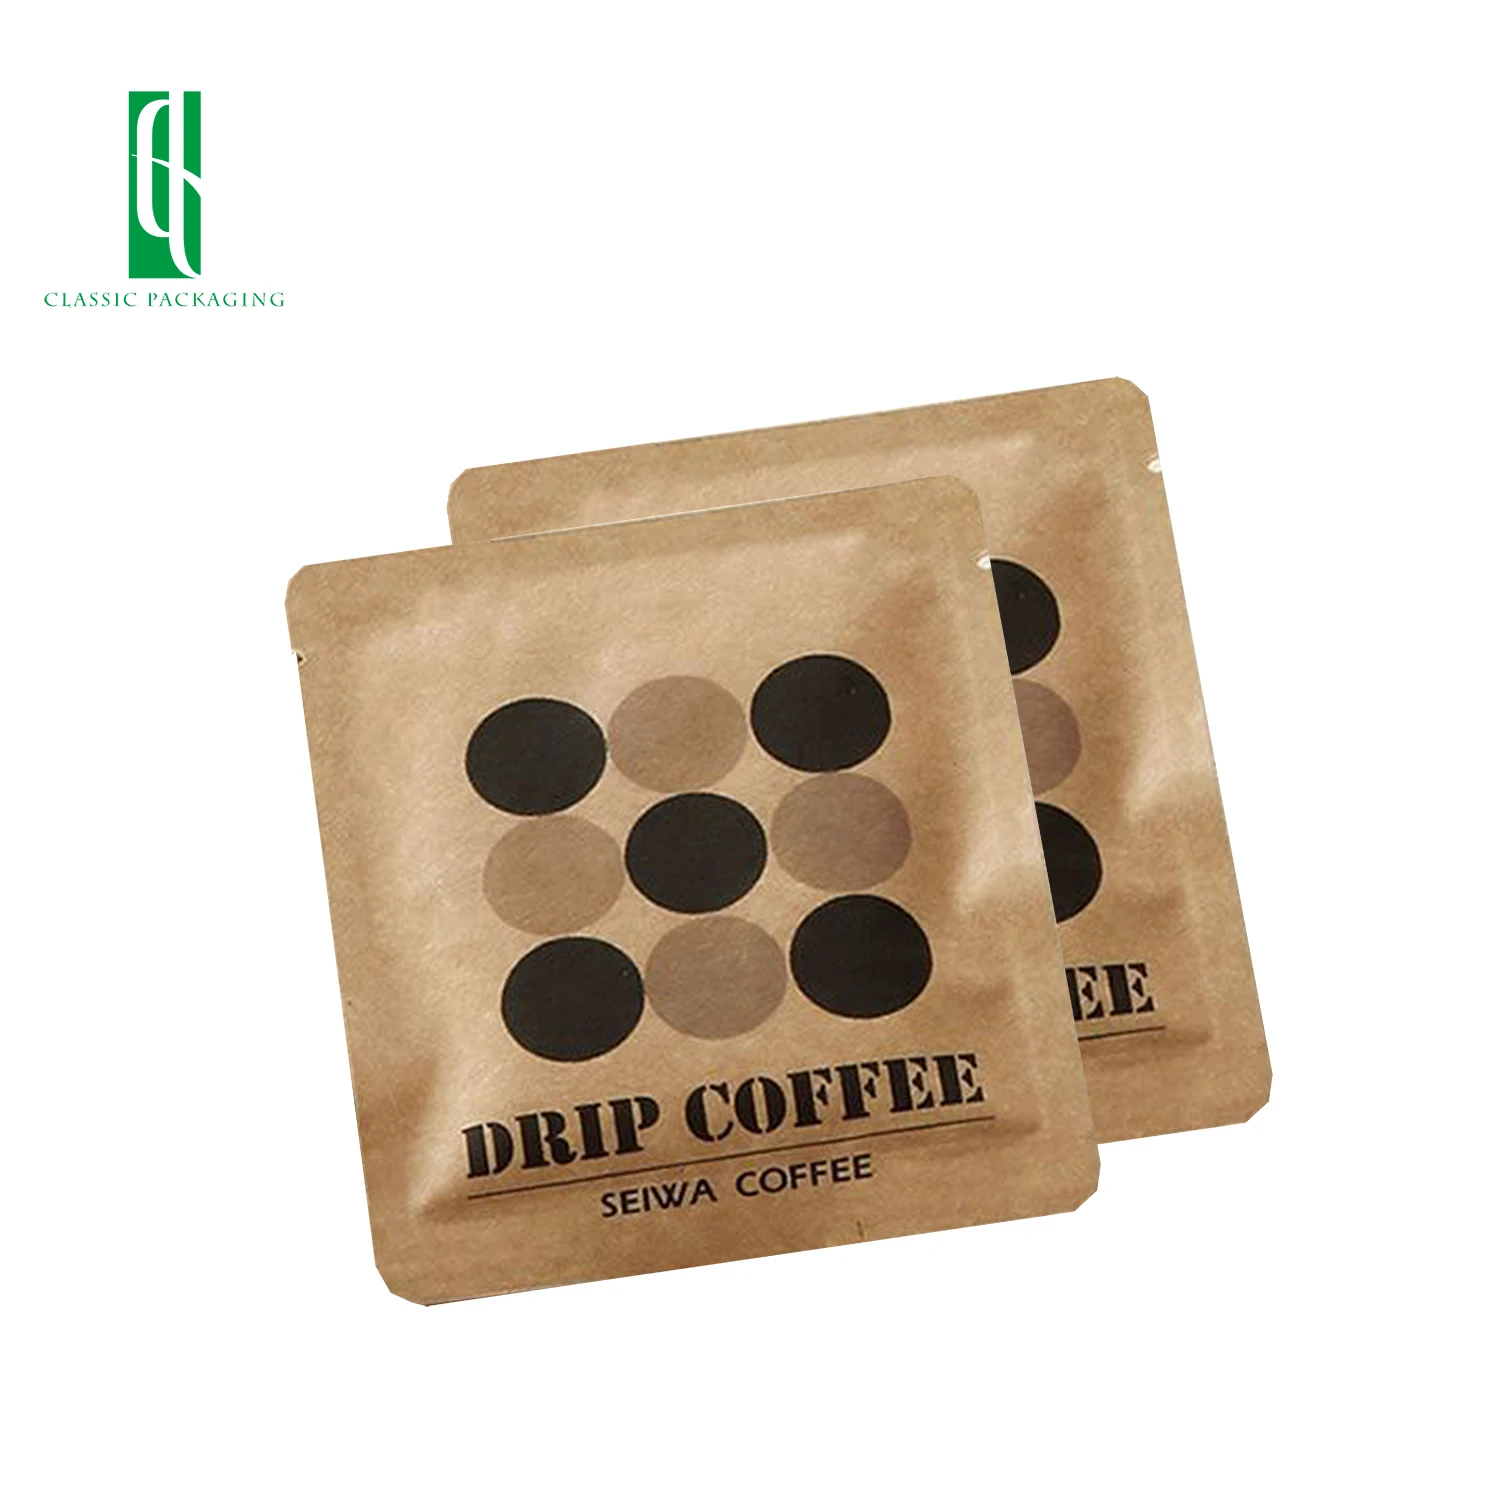 High quality food grade smell proof coffee drip bag filter packaging with tear notch